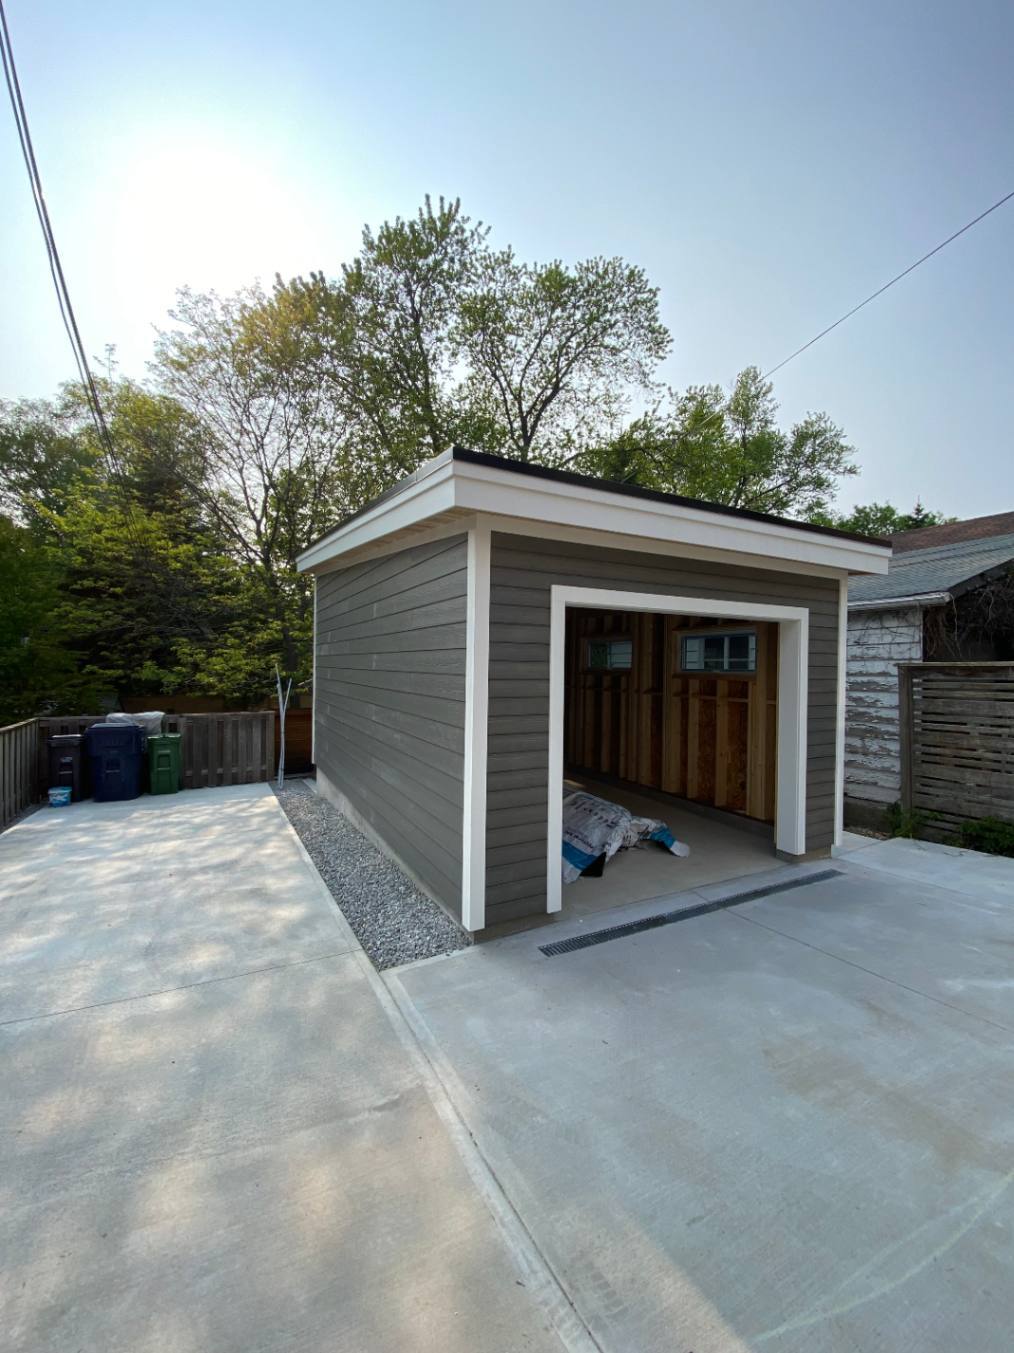 Front view of 20’ x 12' Urban Garage located in Toronto, Ontario – Summerwood Products